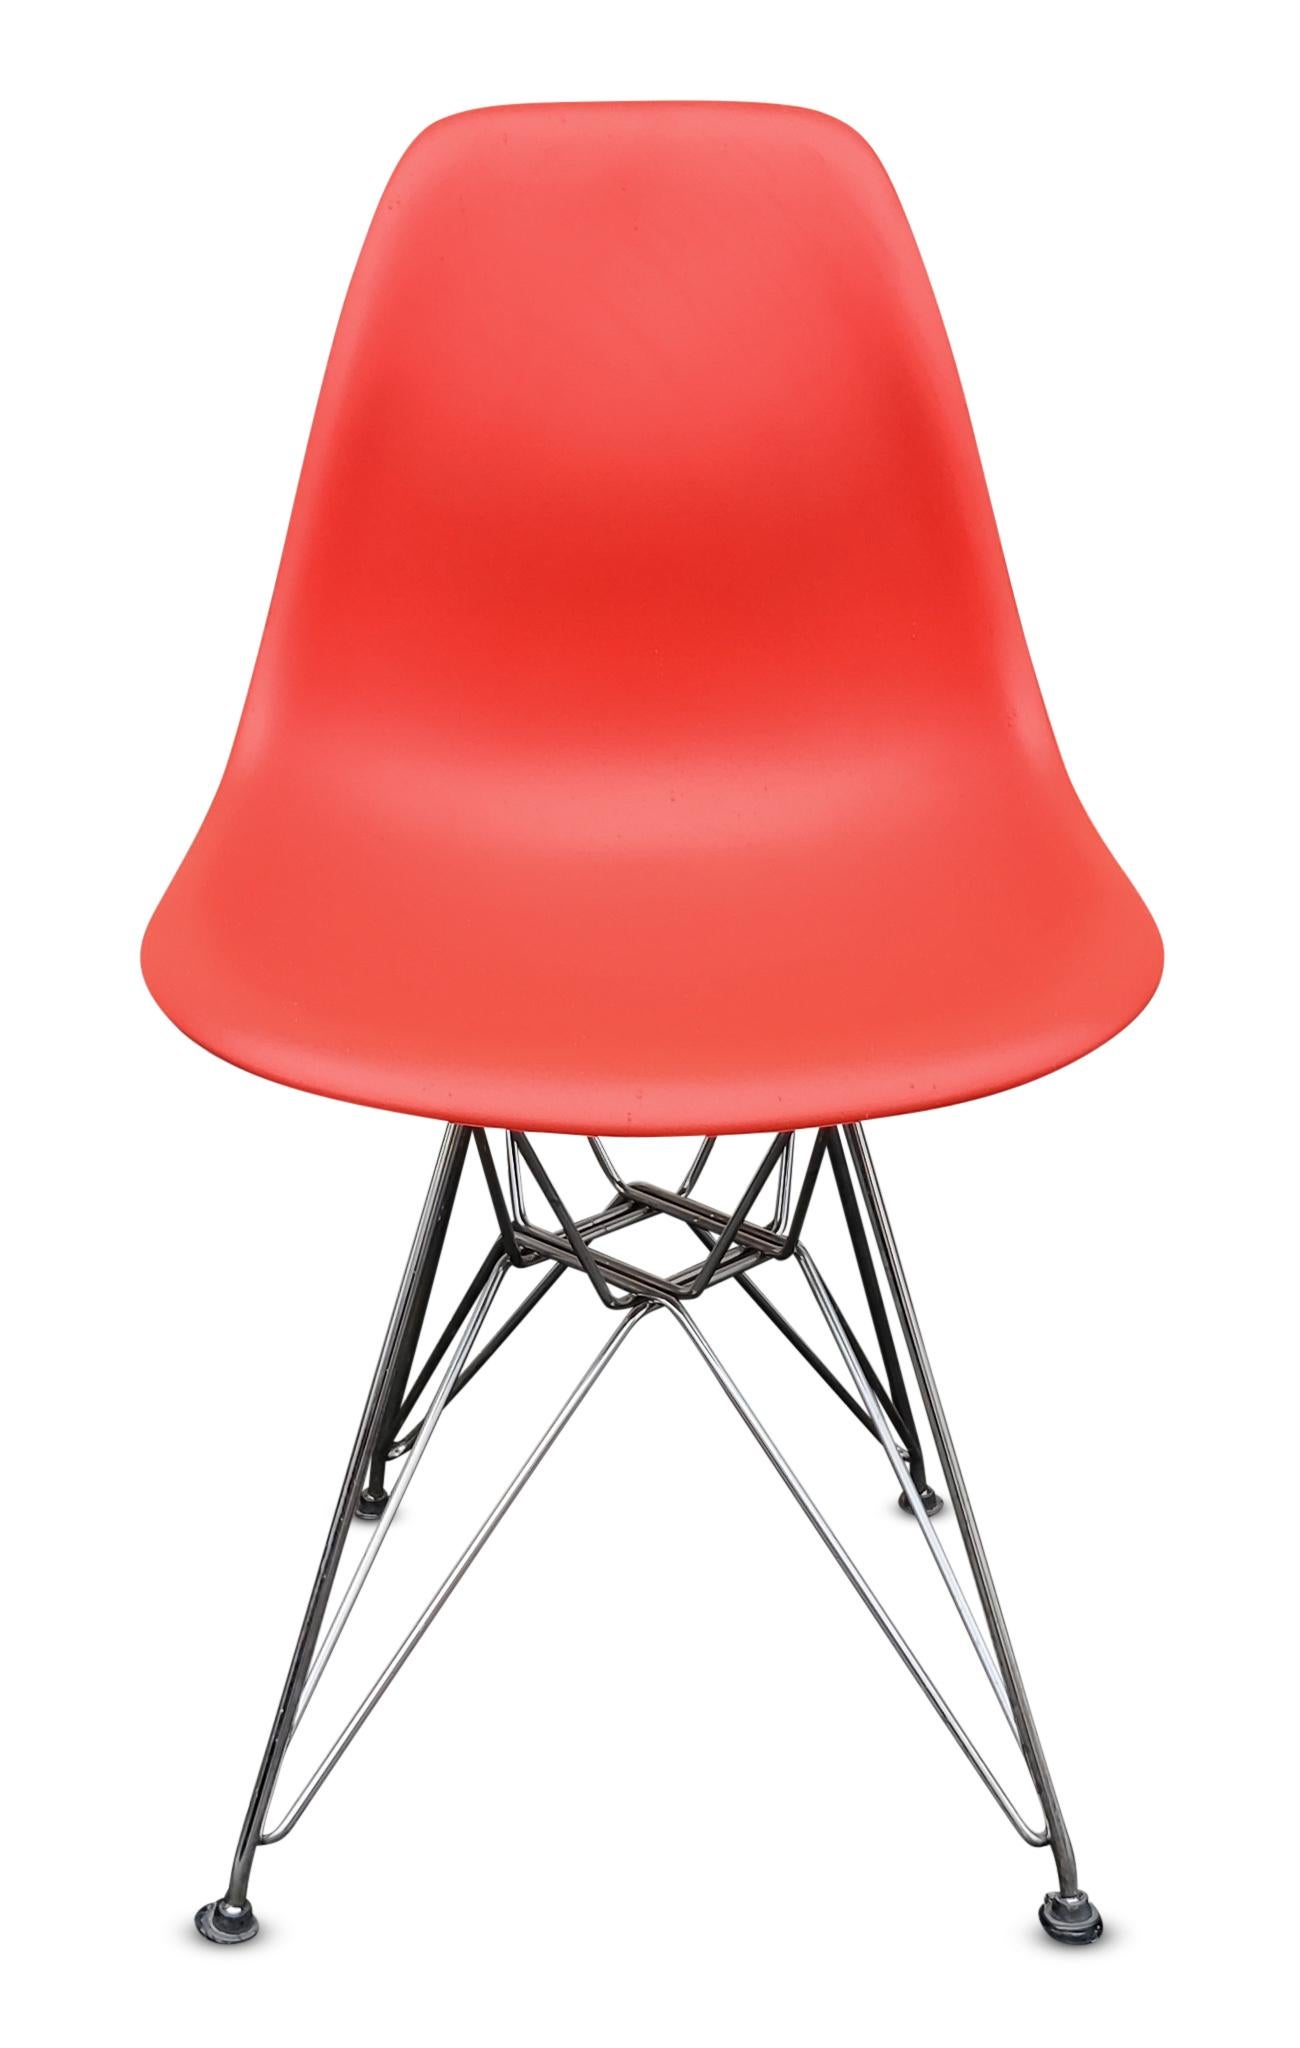 This set of eight chairs was designed by Charles Eames for Herman Miller. This chair and its various designs has seen long-lasting success and adoration, and these chairs are no different. The polycarbonate shells are hot pink, almost bright orange.